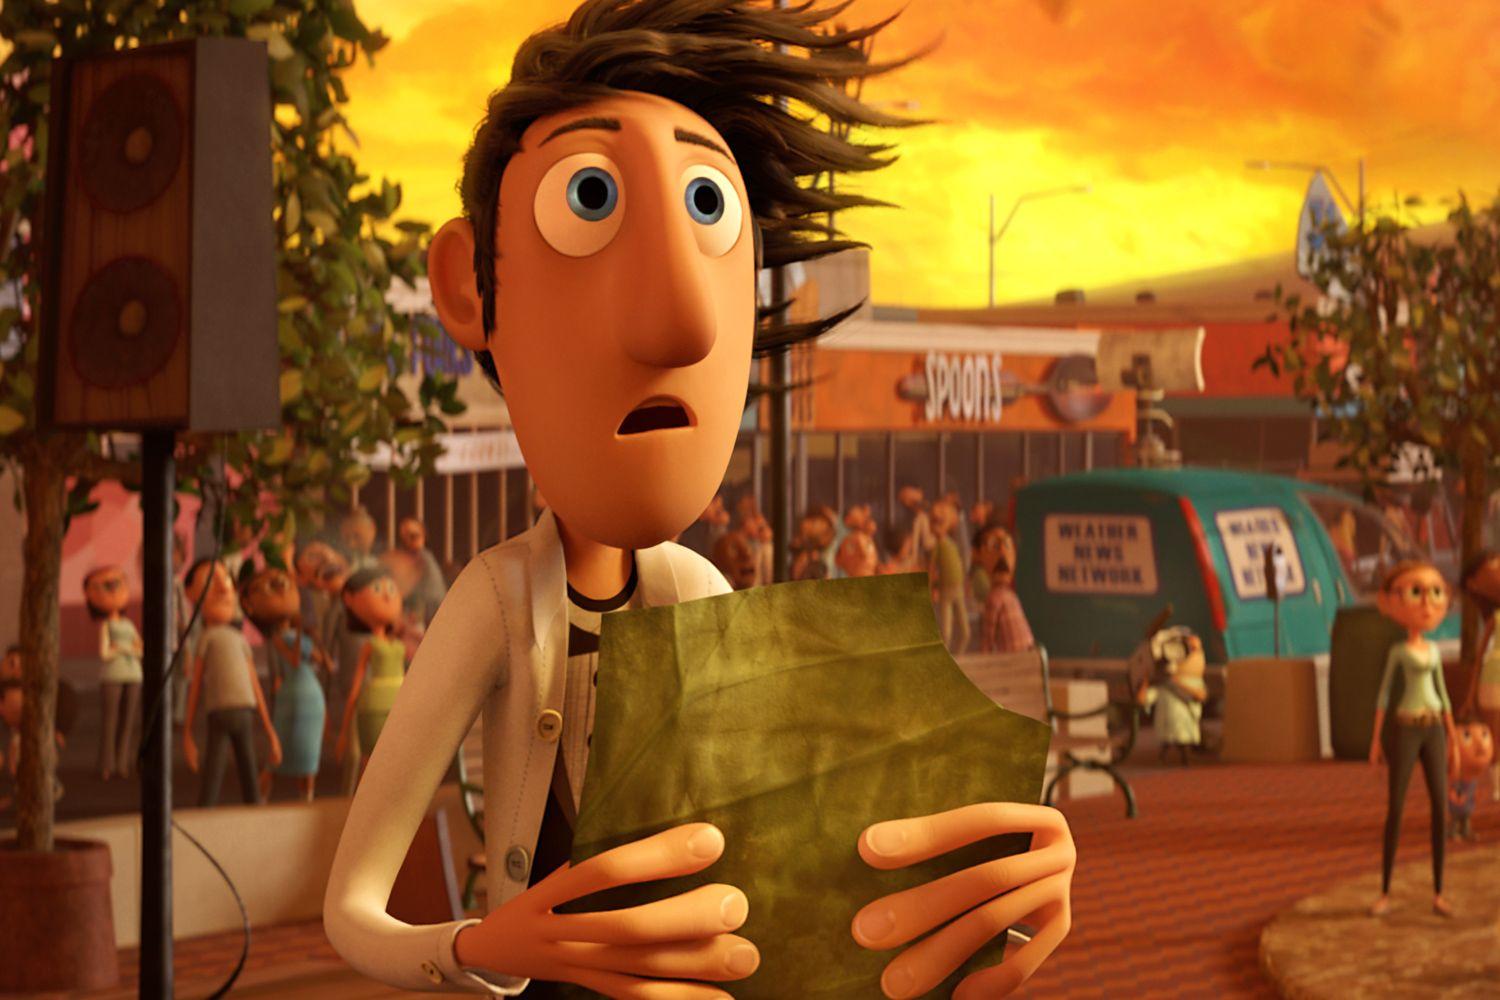 Cloudy With A Chance Of Meatballs Wallpaper High Quality. Download